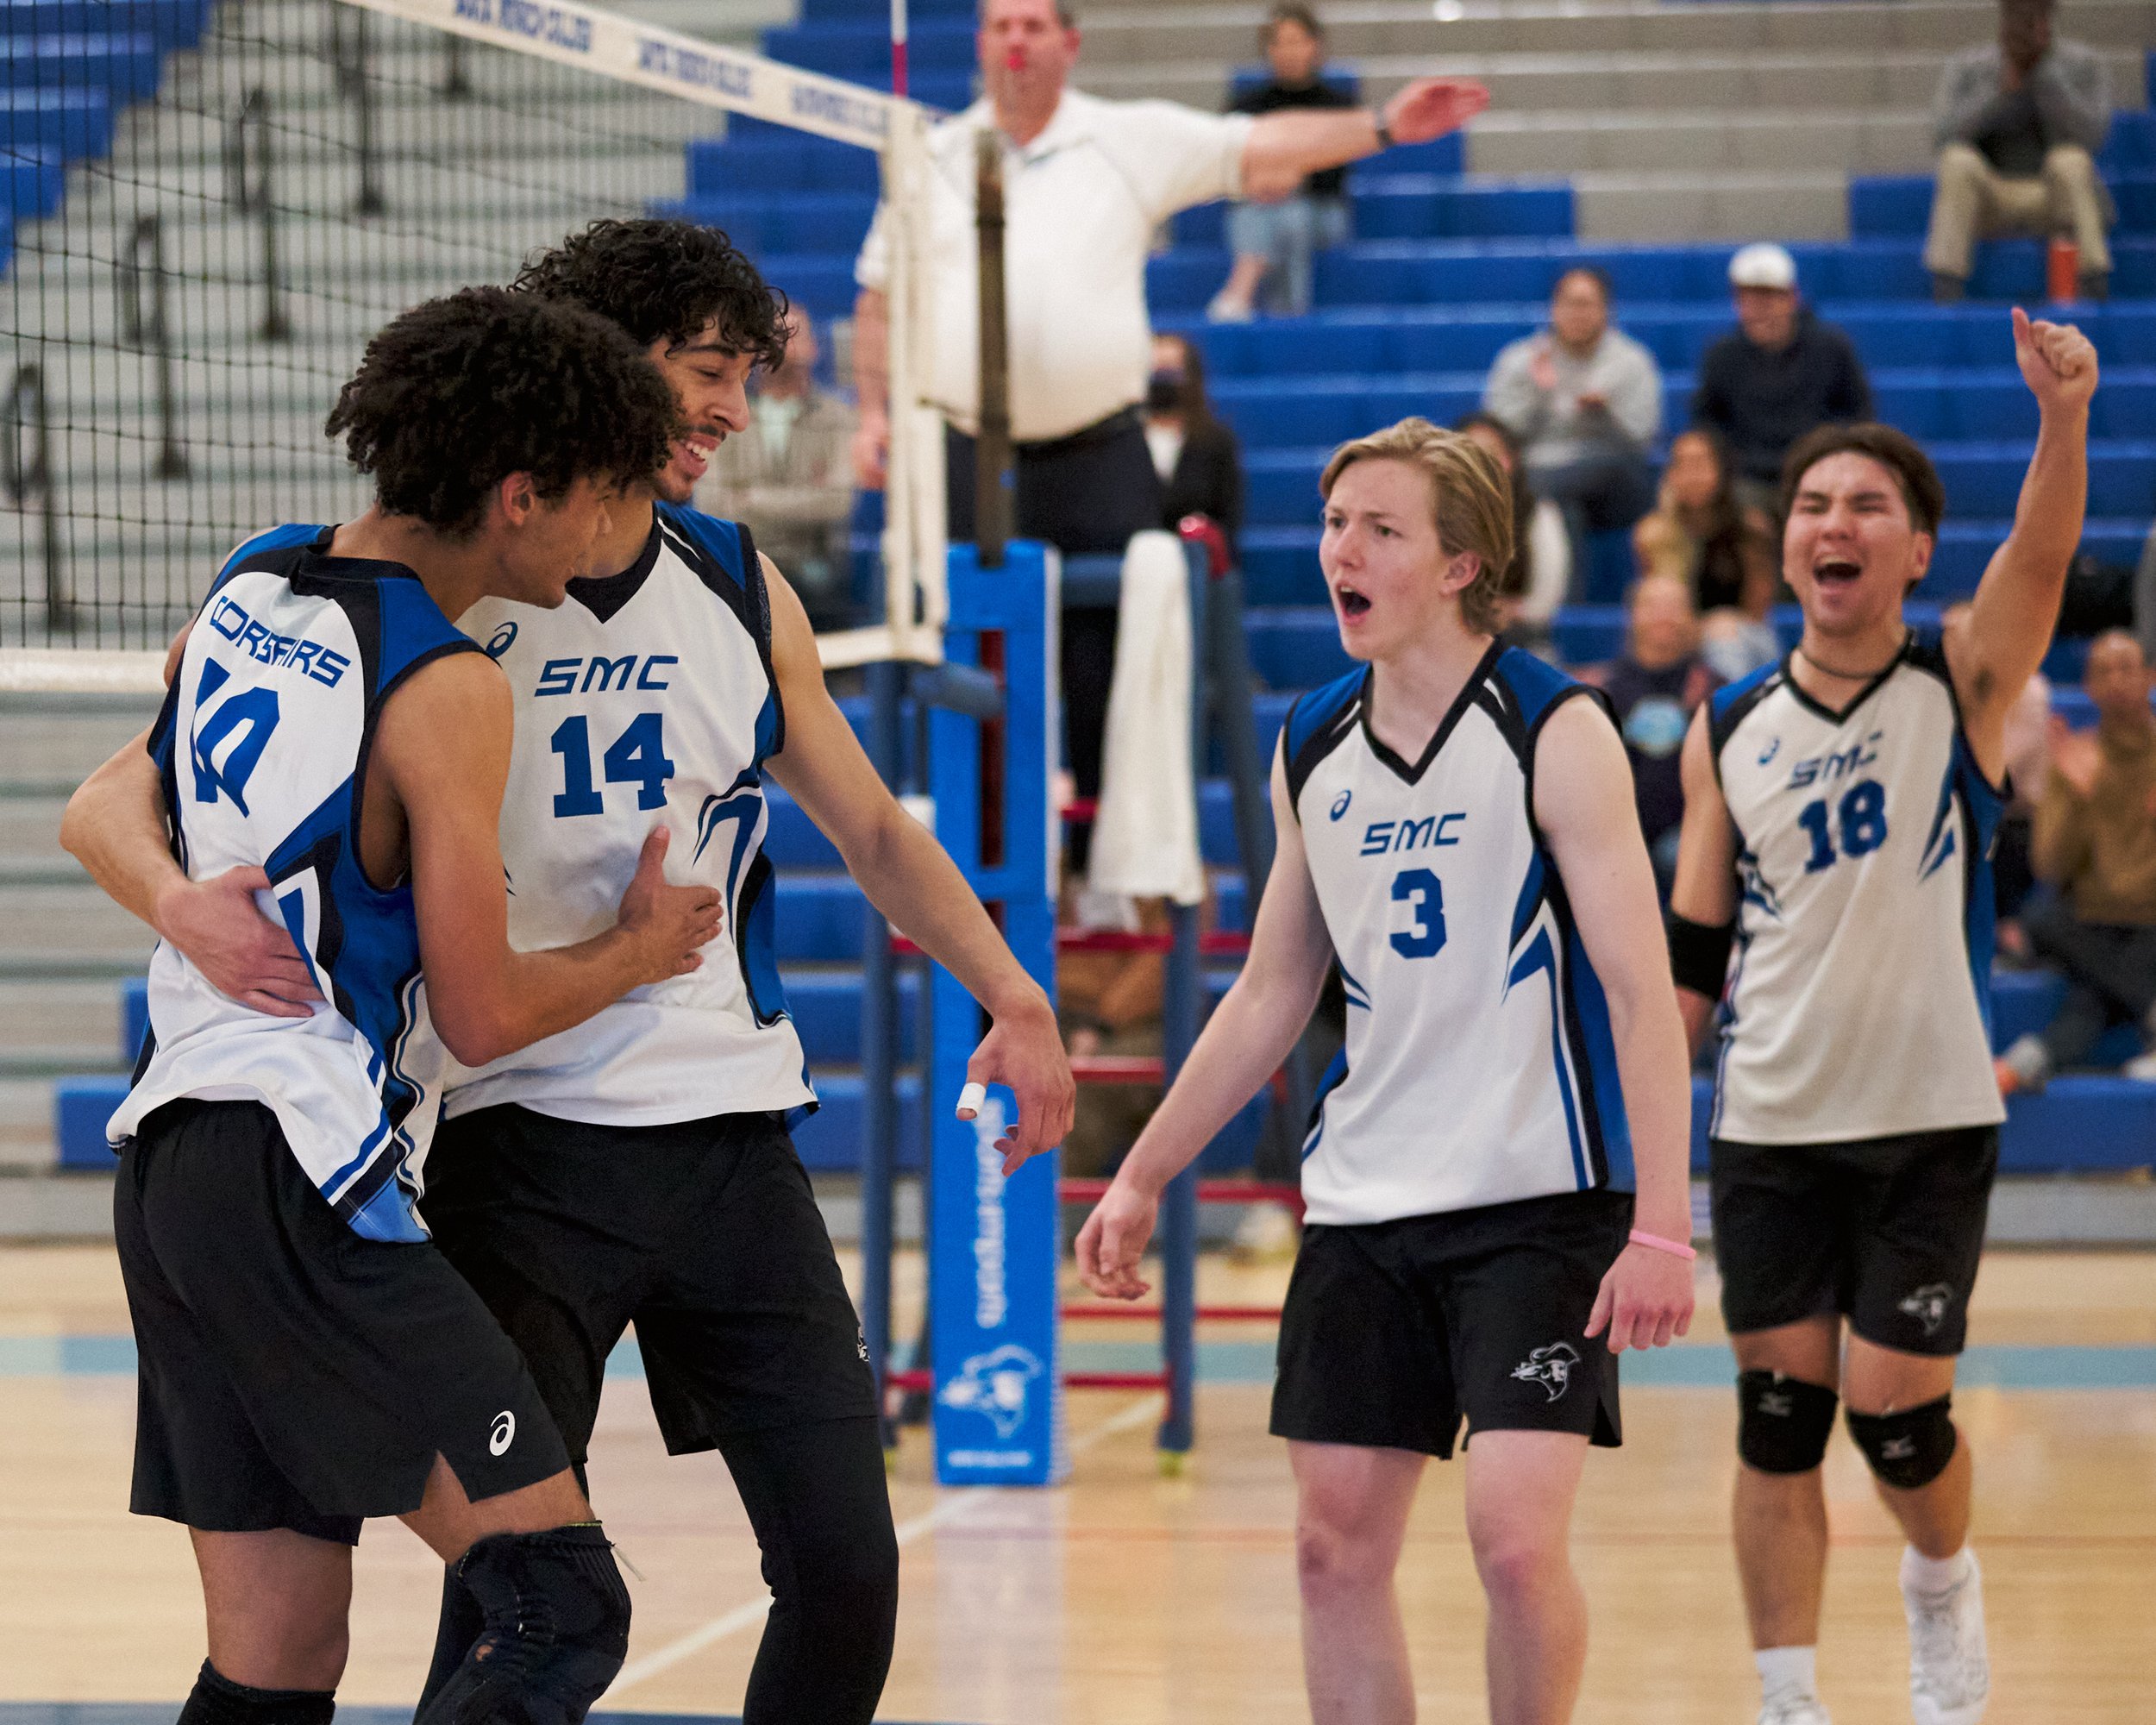  Santa Monica College Corsairs' Nate Davis, Luis Garzon, Camden Higbee, and Enkhtur Tserendavaa celebrate scoring a point during the men's volleyball match against the Long Beach City College Vikings on Friday, March 4, 2023, at Corsair Gym in Santa 